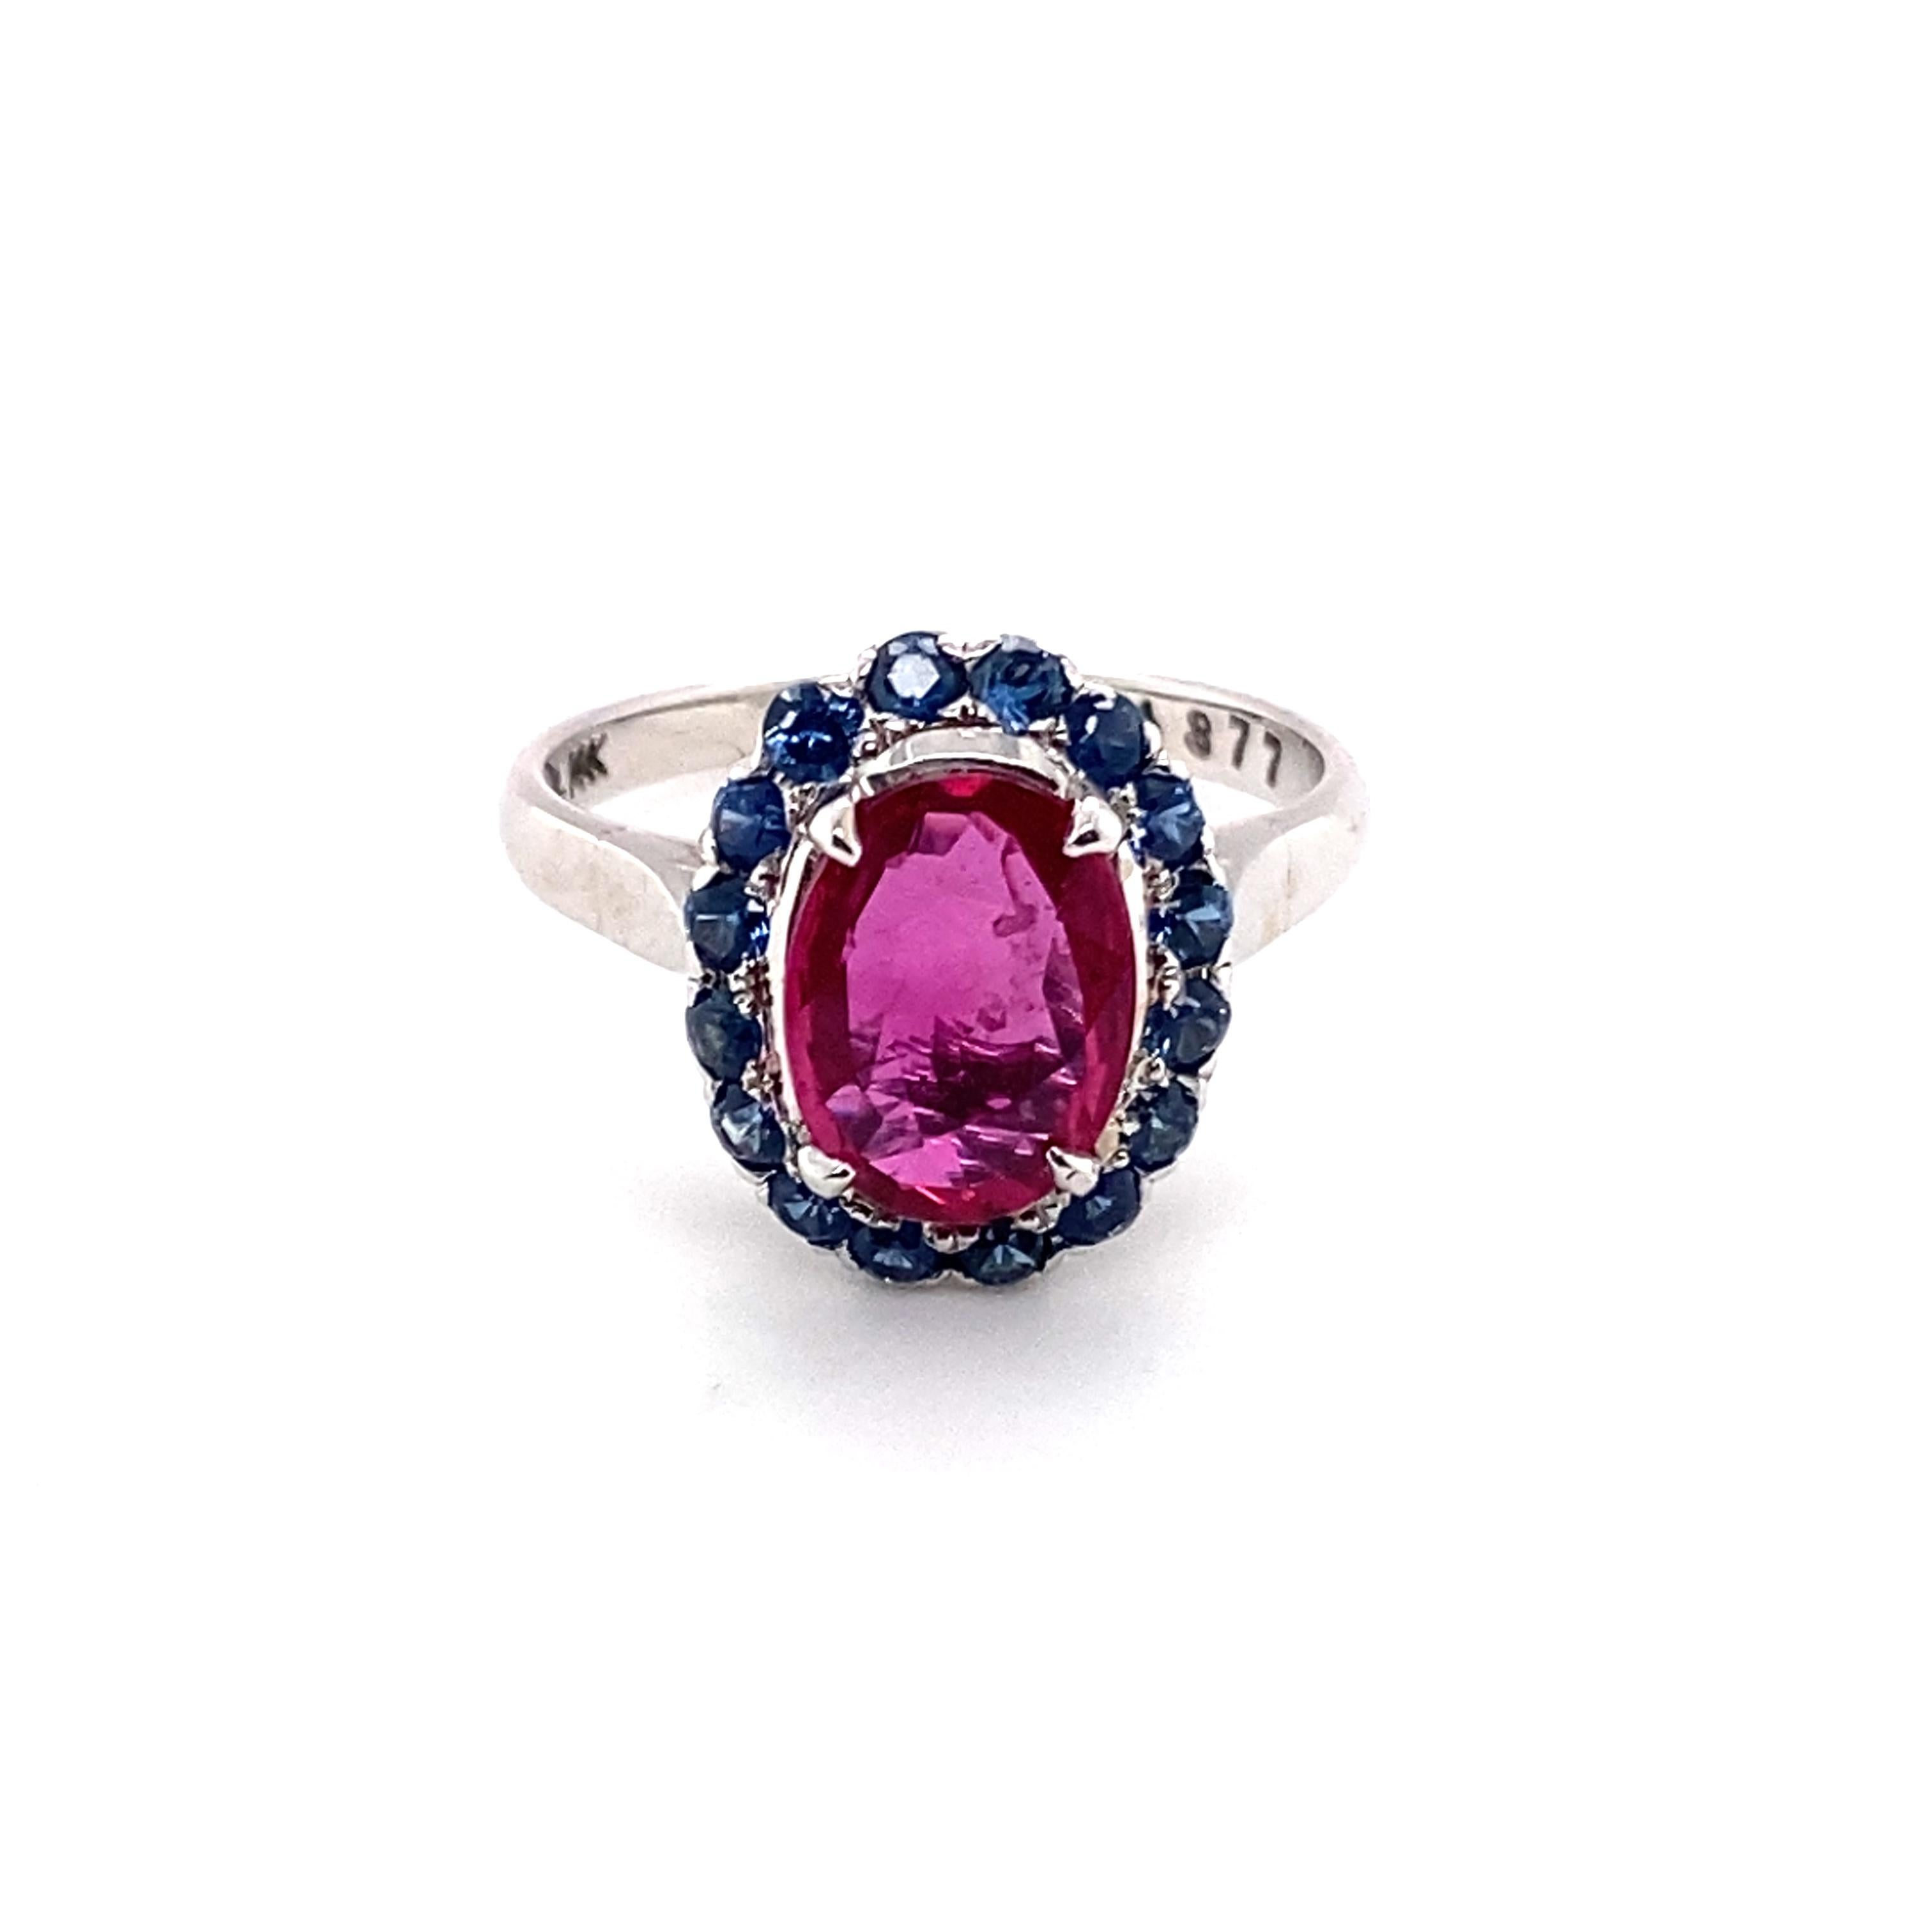 1.56 Carat Total Ruby and 1.14 Carat Total Sapphire Ring in 14 Karat White Gold For Sale 1